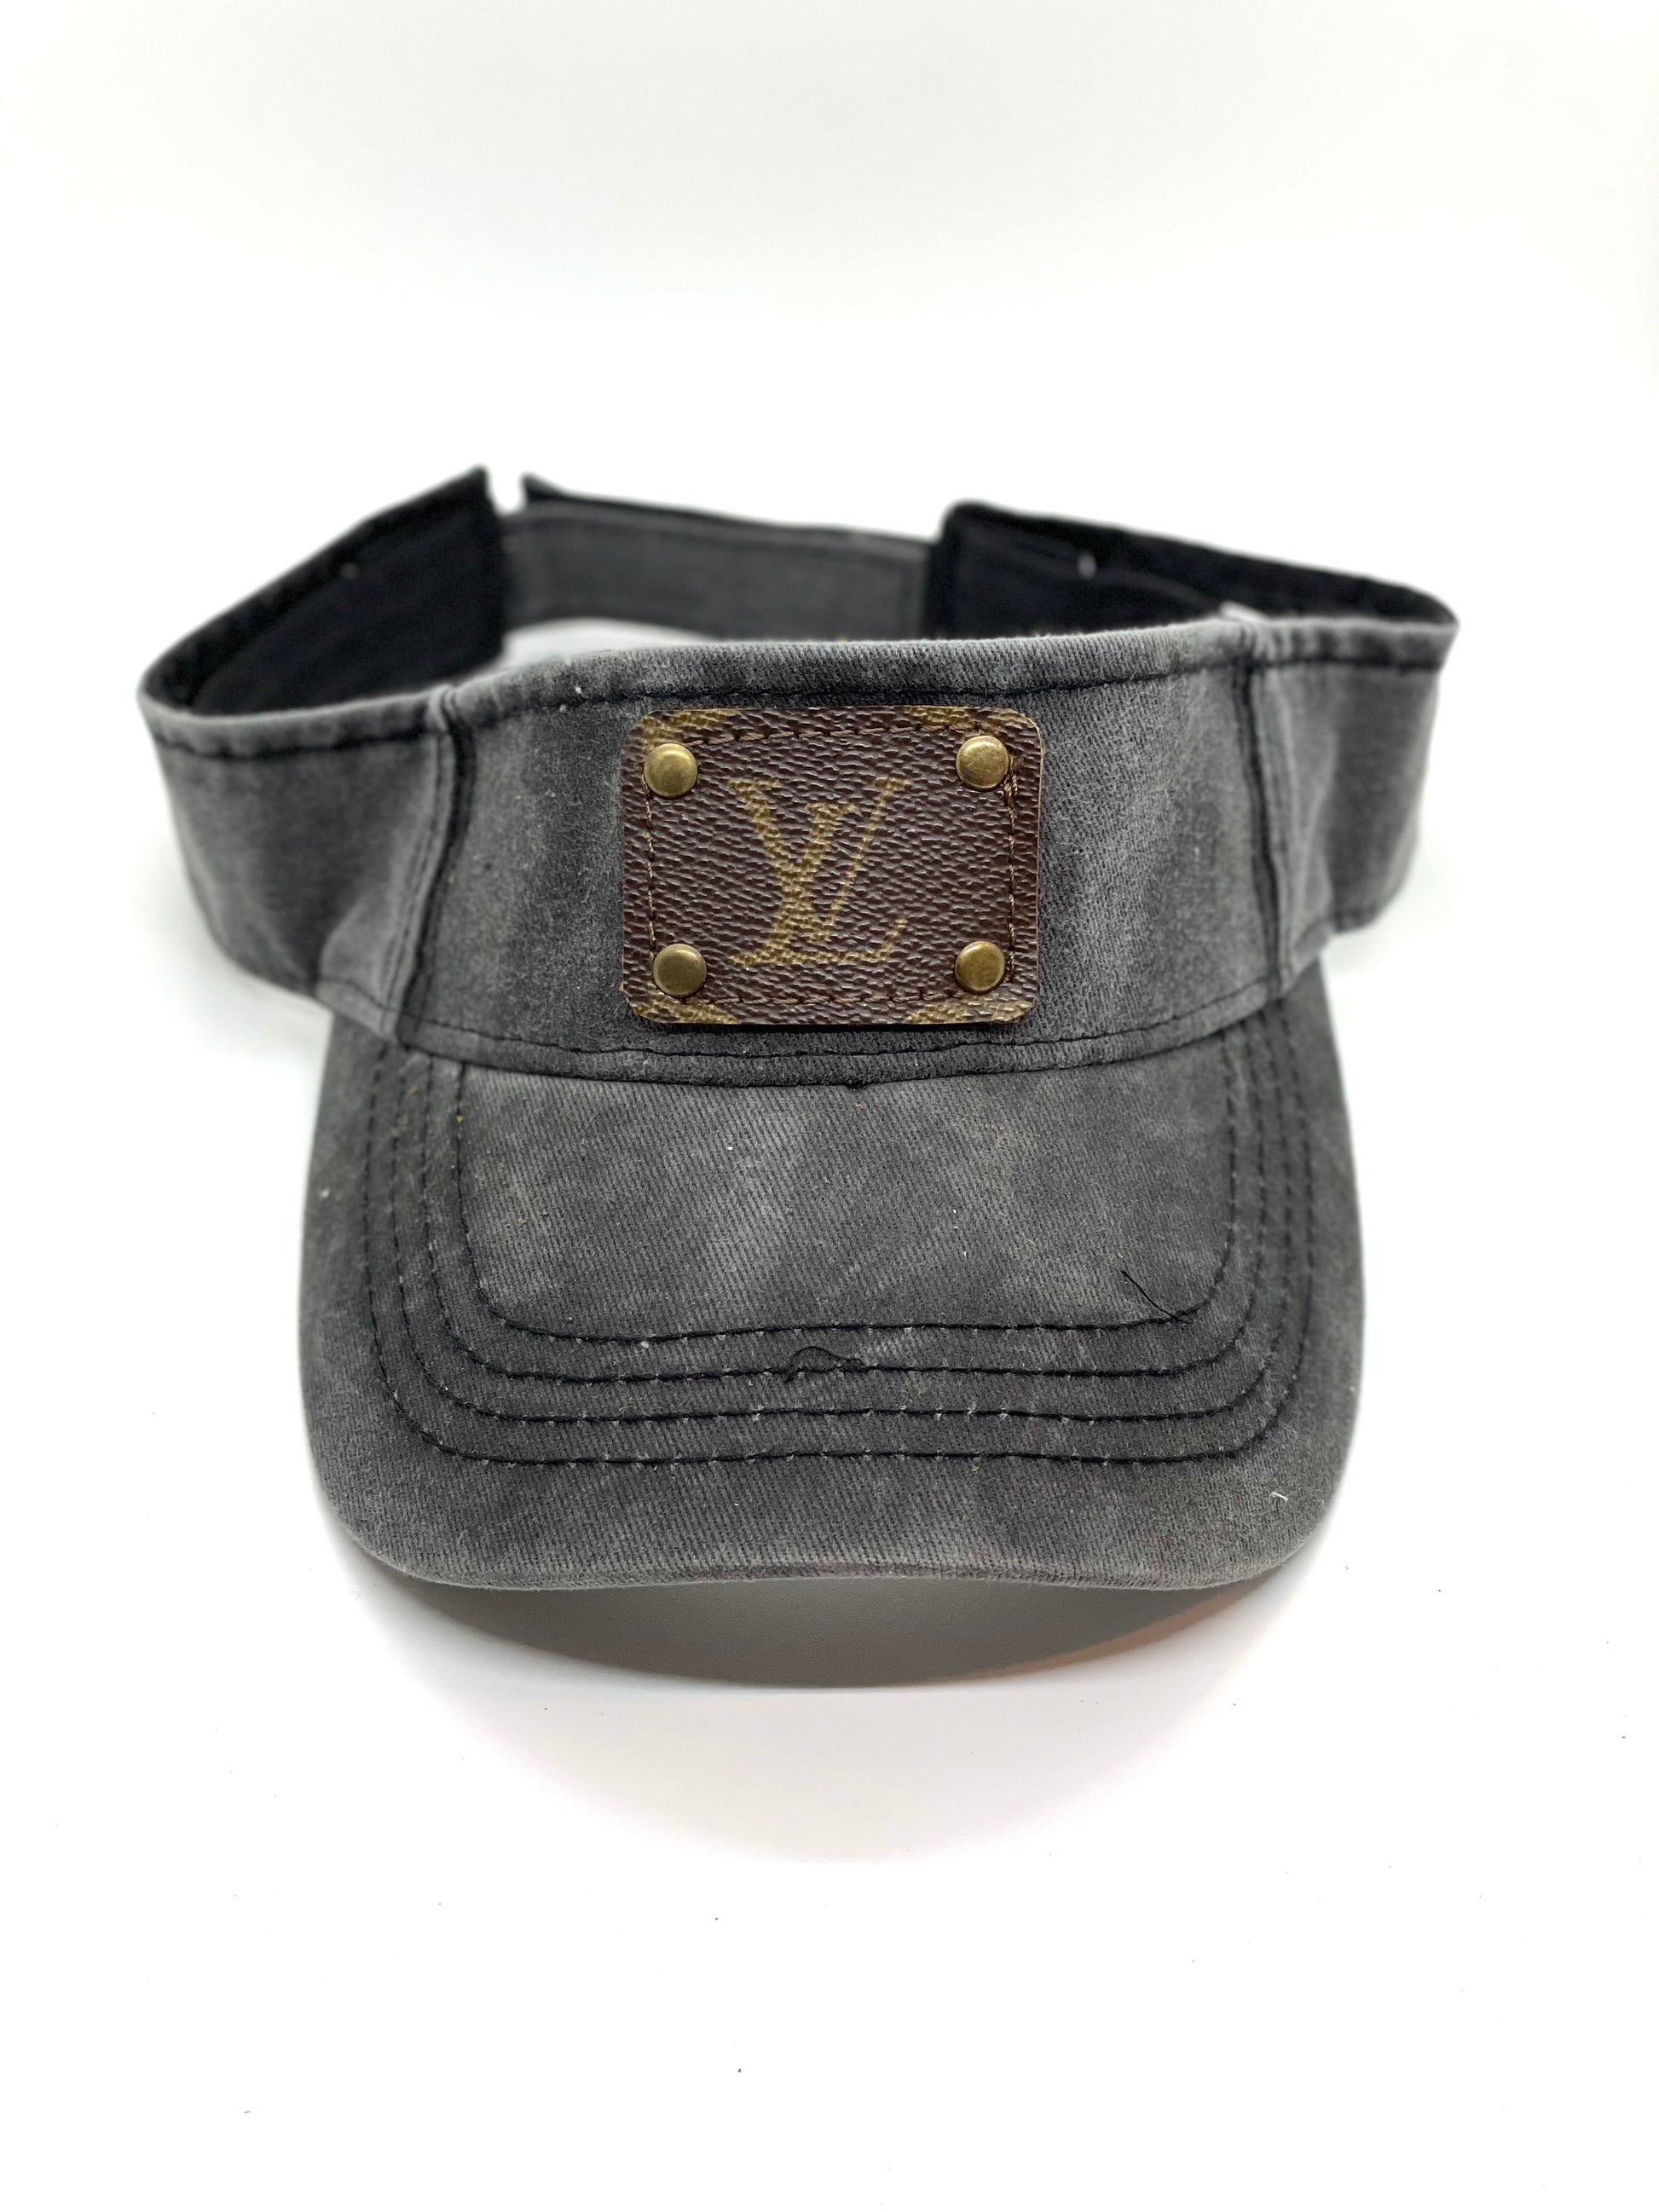 ZZ5 - Faded Black Visor Antique Hardware - Patches Of Upcycling